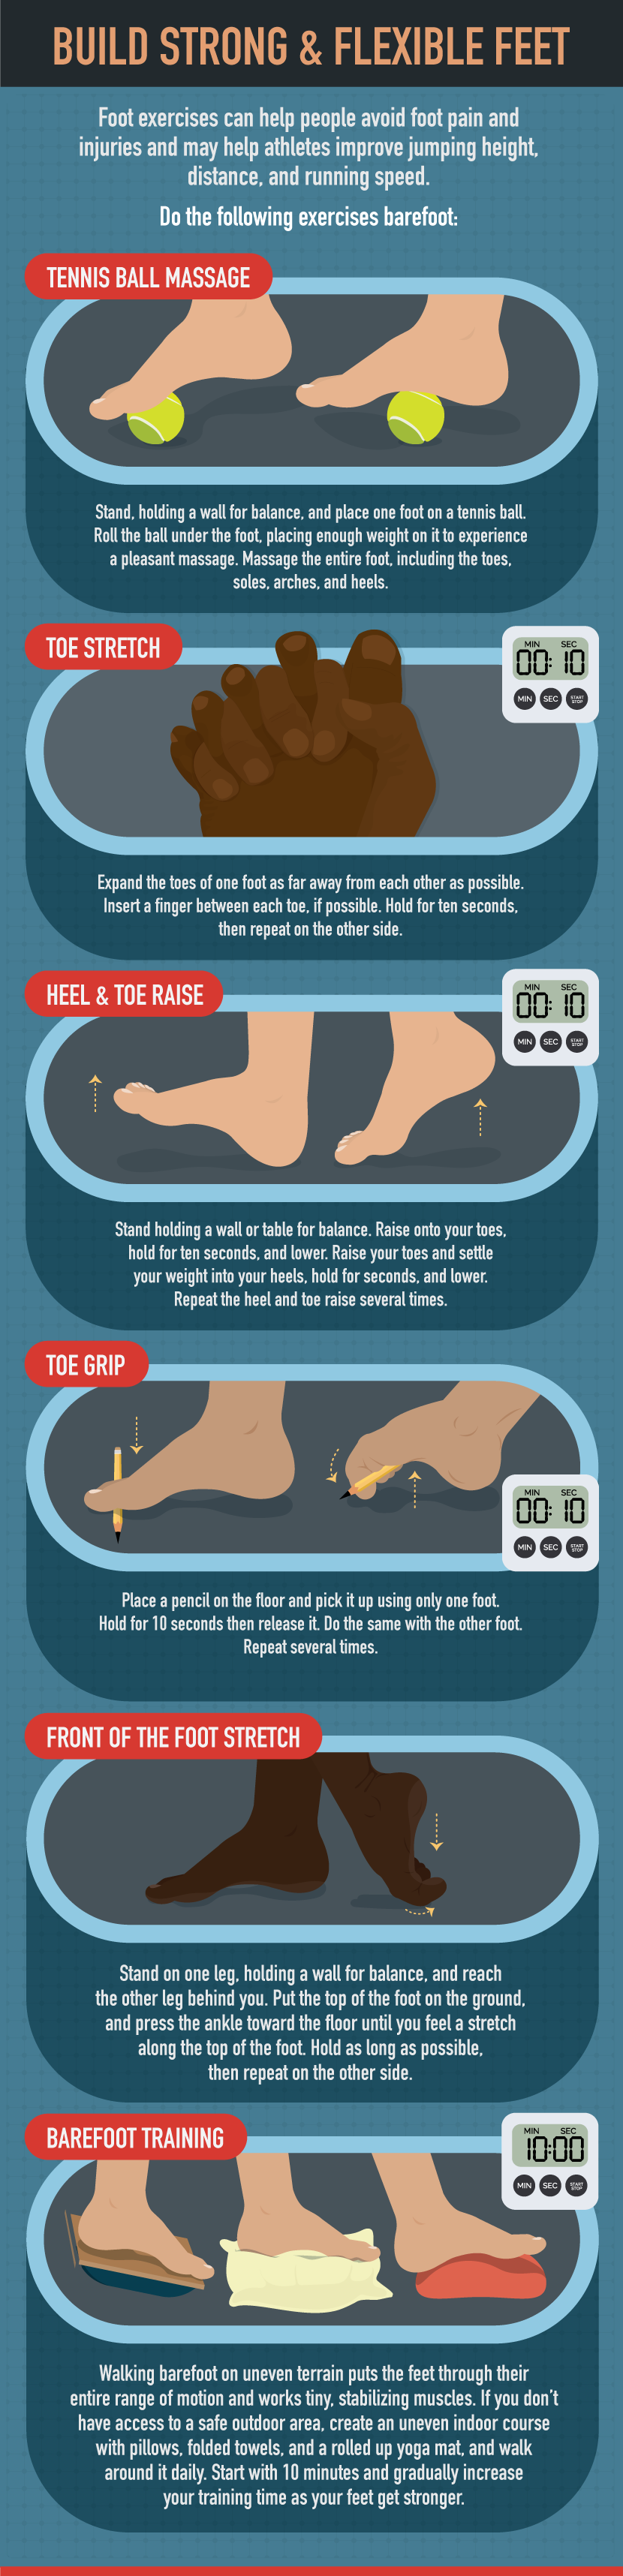 Top 12 Exercises & Stretches to Treat and Prevent Foot Pain - Feet